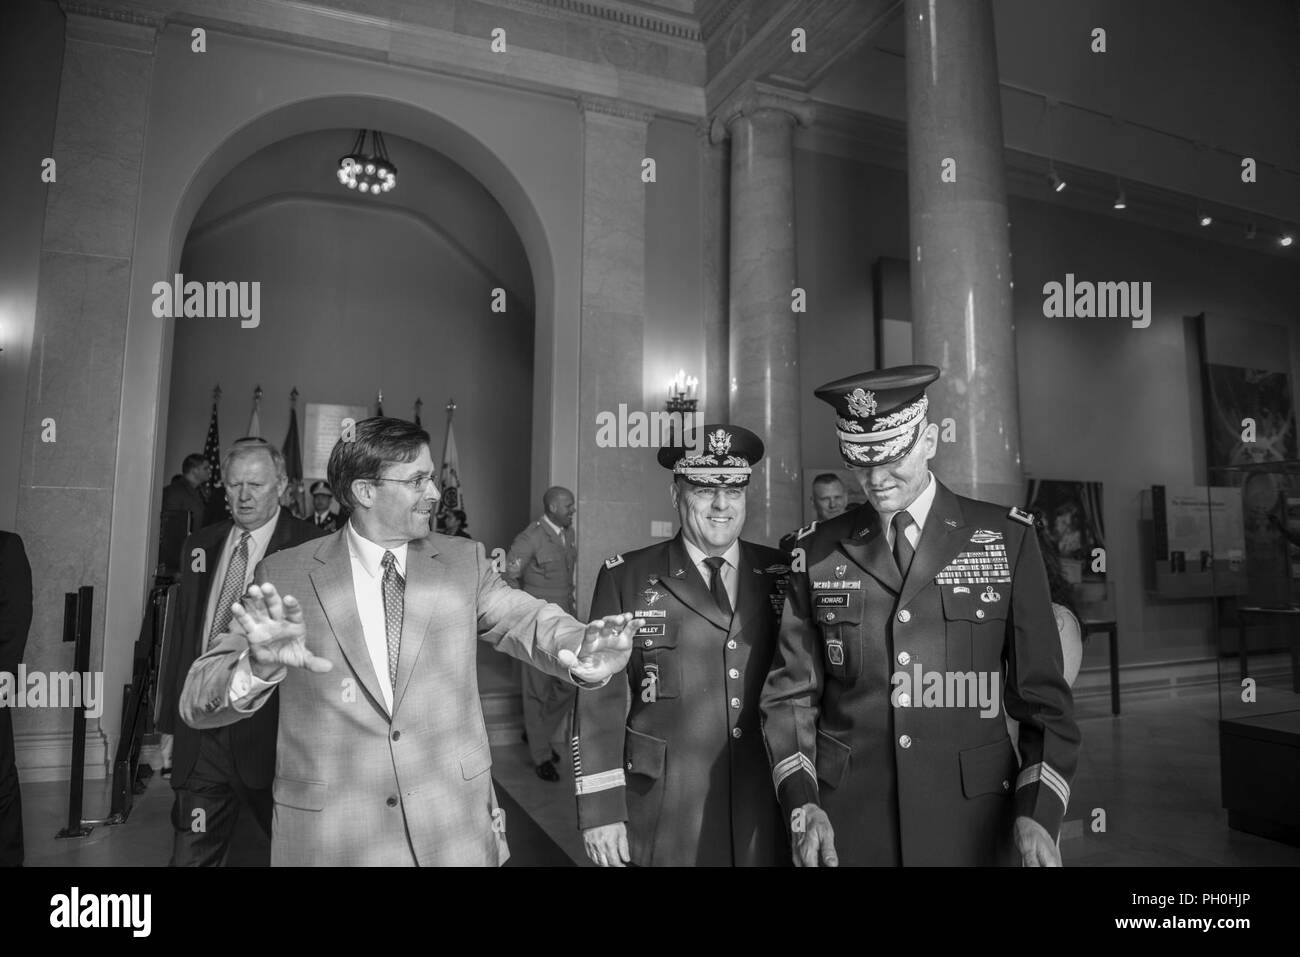 (From the left) Mark T. Esper, secretary, U.S. Army; speaks with Gen. Mark A. Milley, chief of staff, U.S. Army;  and Maj. Gen. Michael Howard, commanding general, U.S. Army Military District of Washington inside of the Memorial Amphitheater Display Room before participating an Army Full Honors Wreath-Laying Ceremony at the Tomb of the Unknown Soldier in honor of the U.S. Army’s 243rd birthday at Arlington National Cemetery, Arlington, Virginia, June 14, 2018. Stock Photo